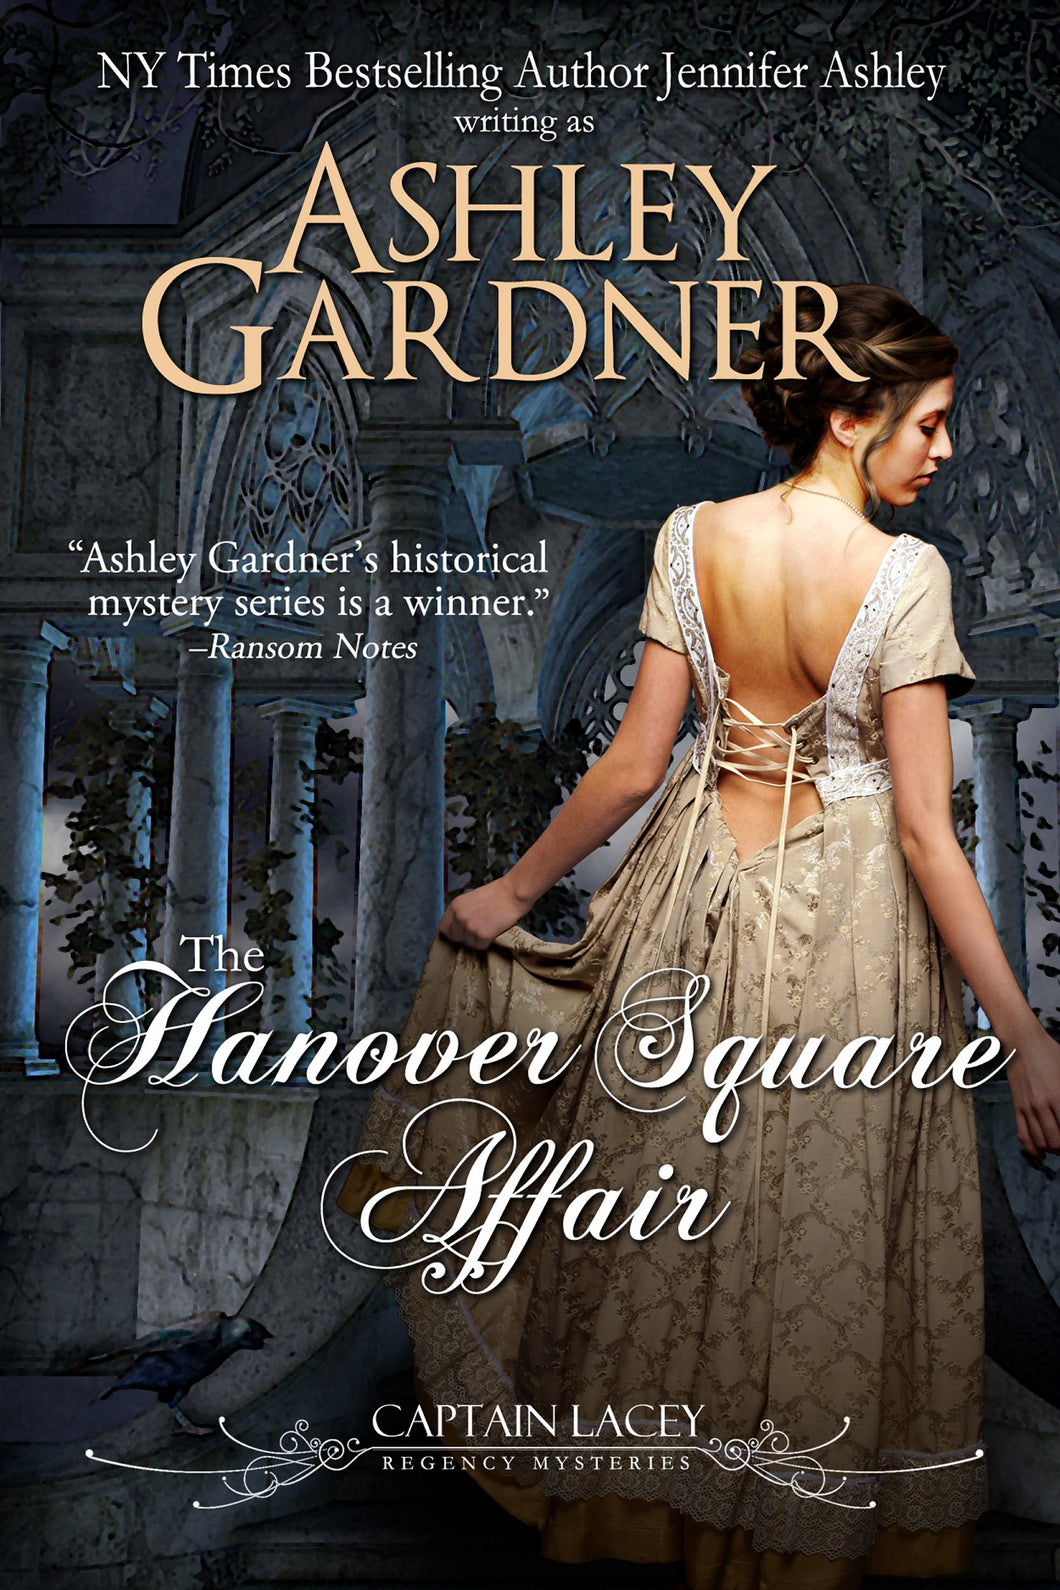 The Hanover Square Affair (Captain Lacey Regency Mysteries, Book 1)